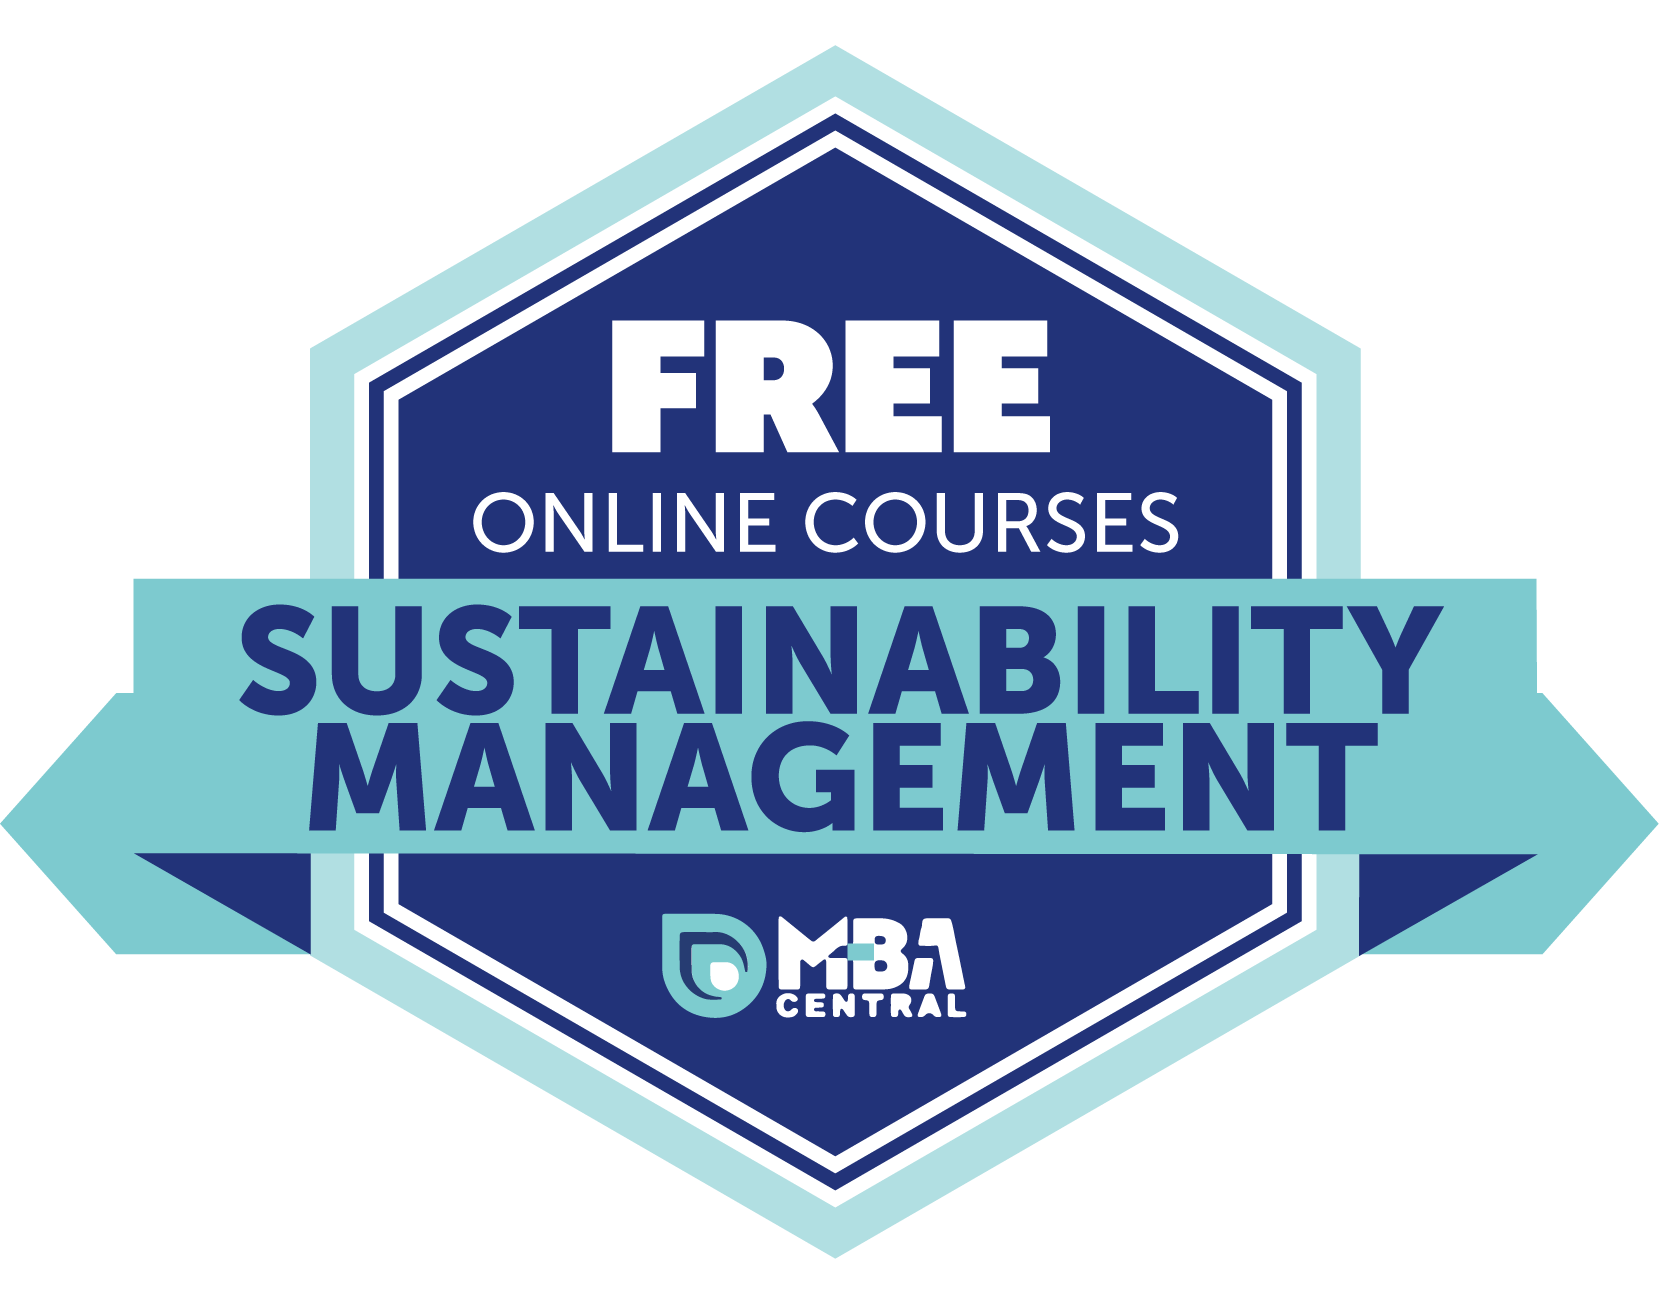 40+ FREE Online Courses with Certificates